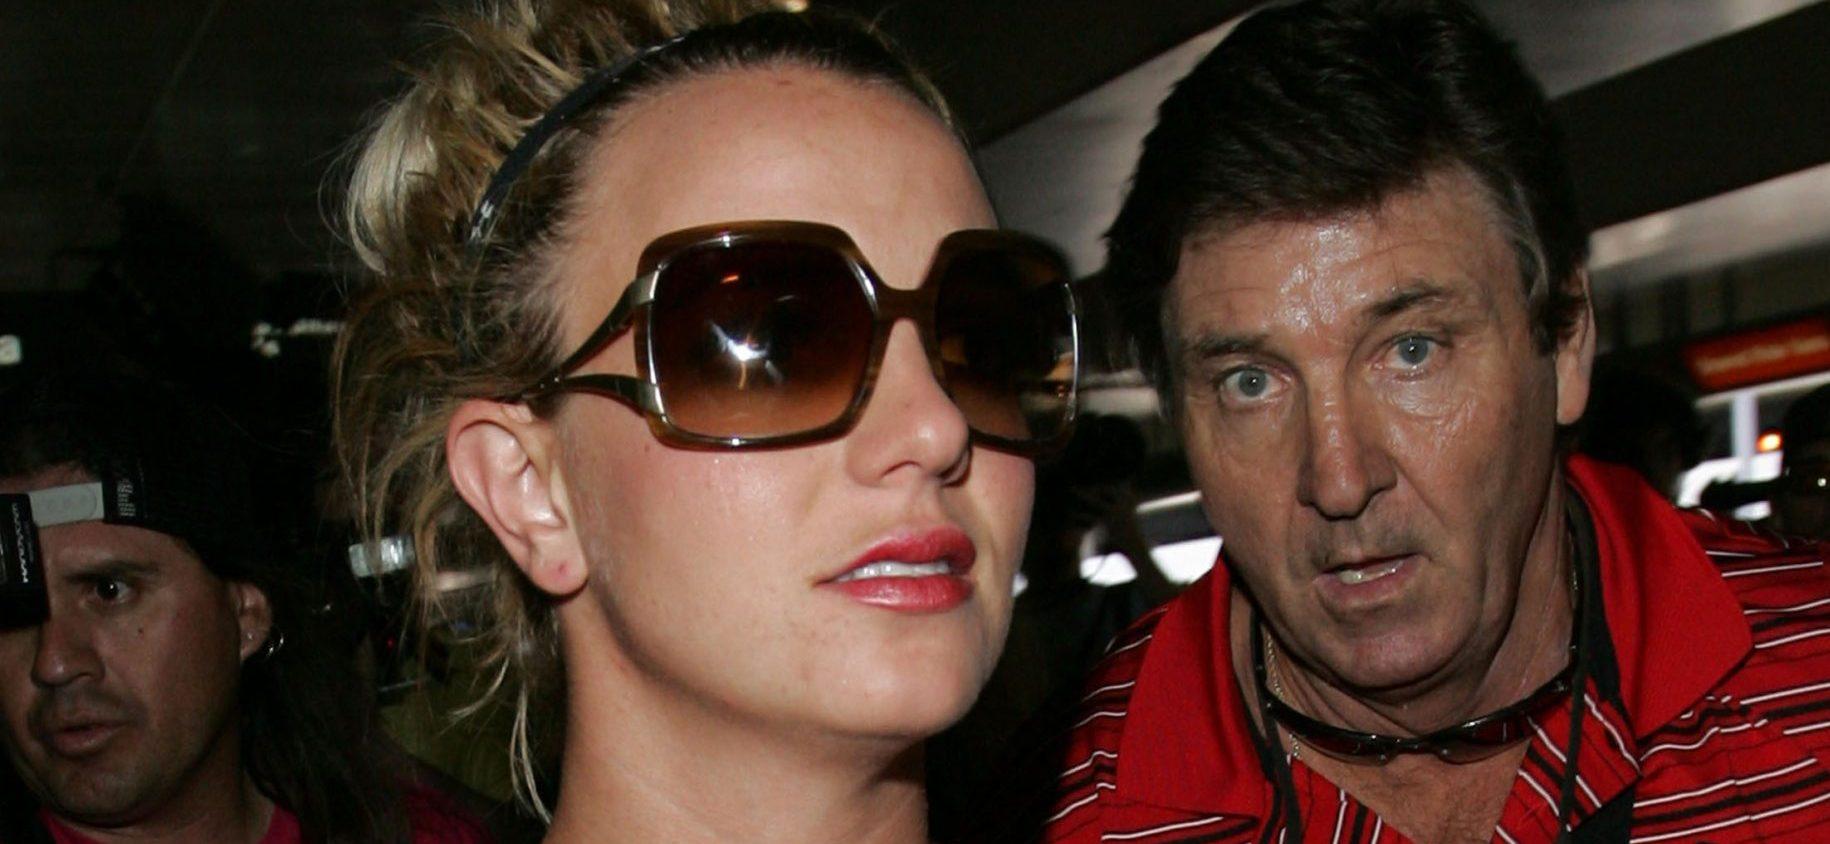 Britney Spears Reflects On Her Father’s ‘Control’ Over Her Body During Her Conservatorship